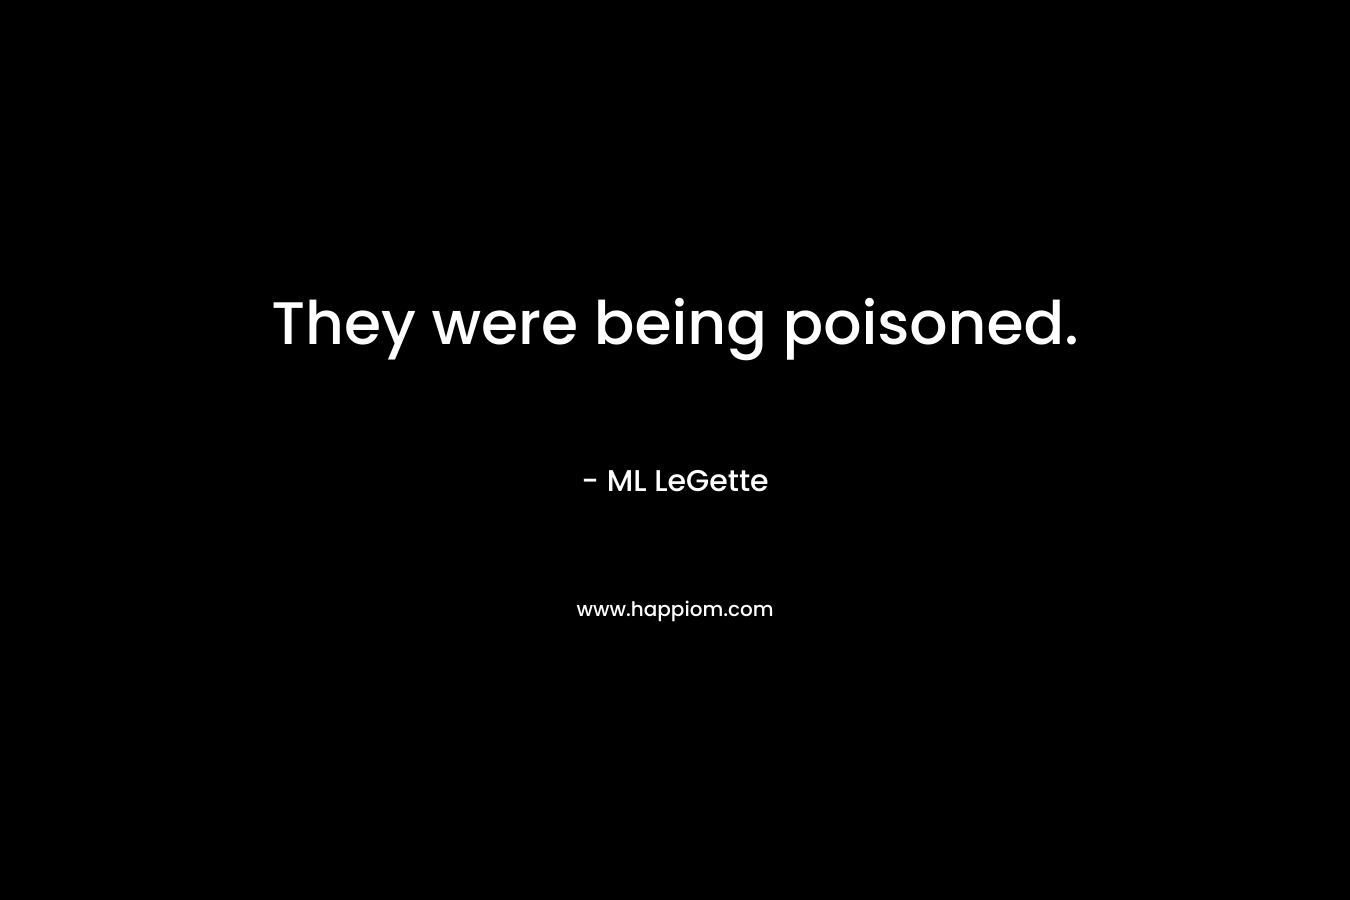 They were being poisoned.